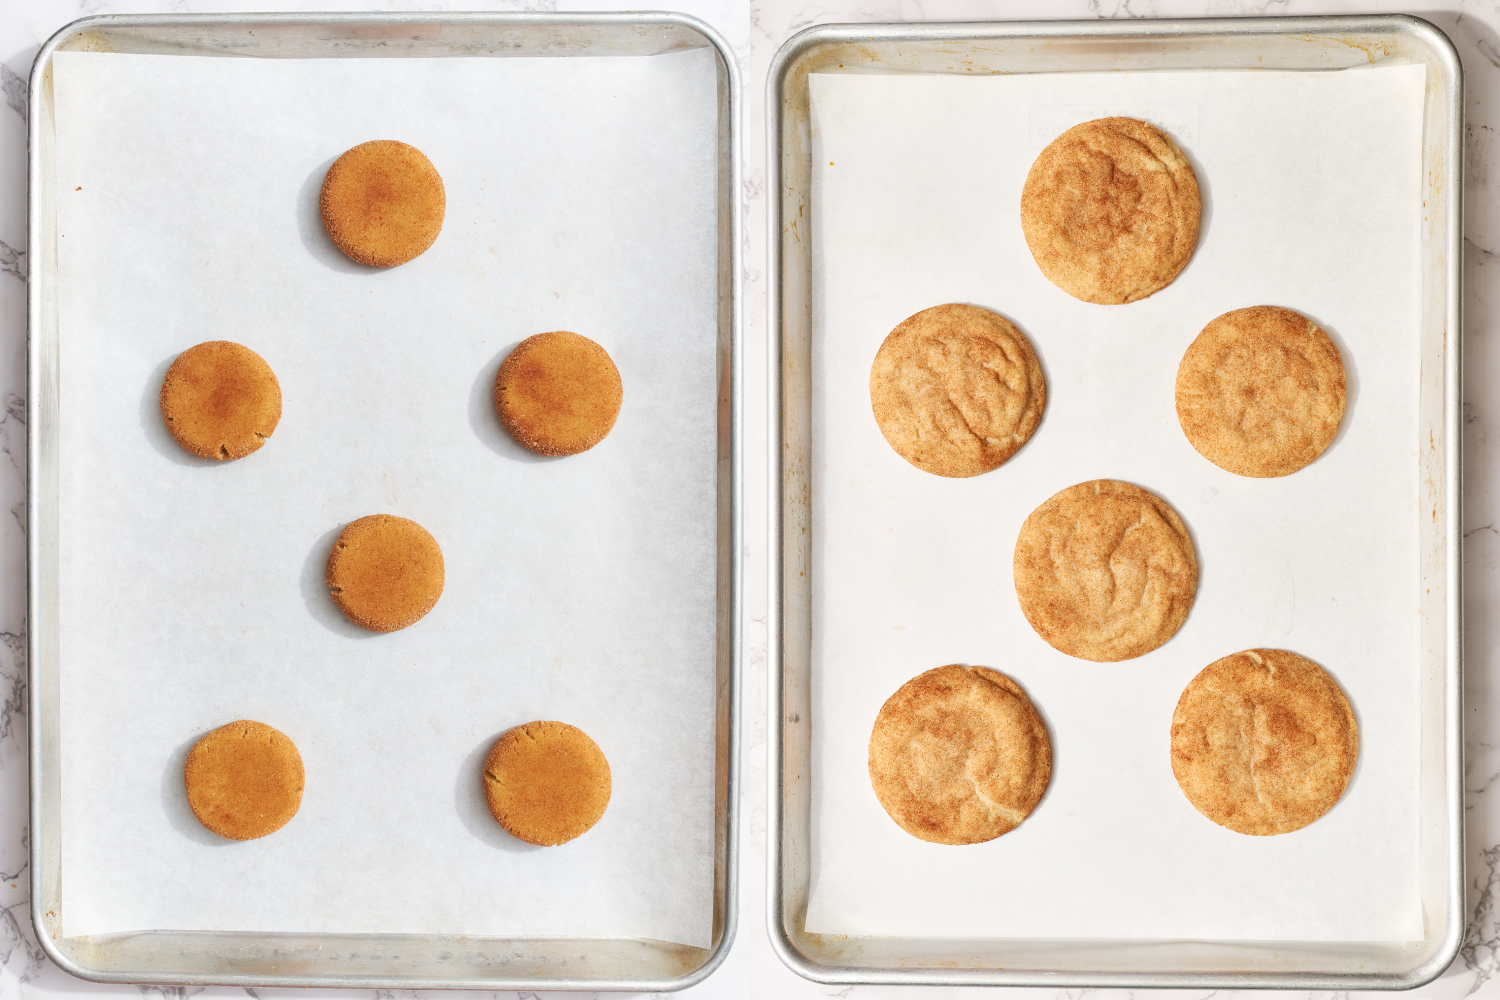 two side-by-side baking trays, showing before and after baking.